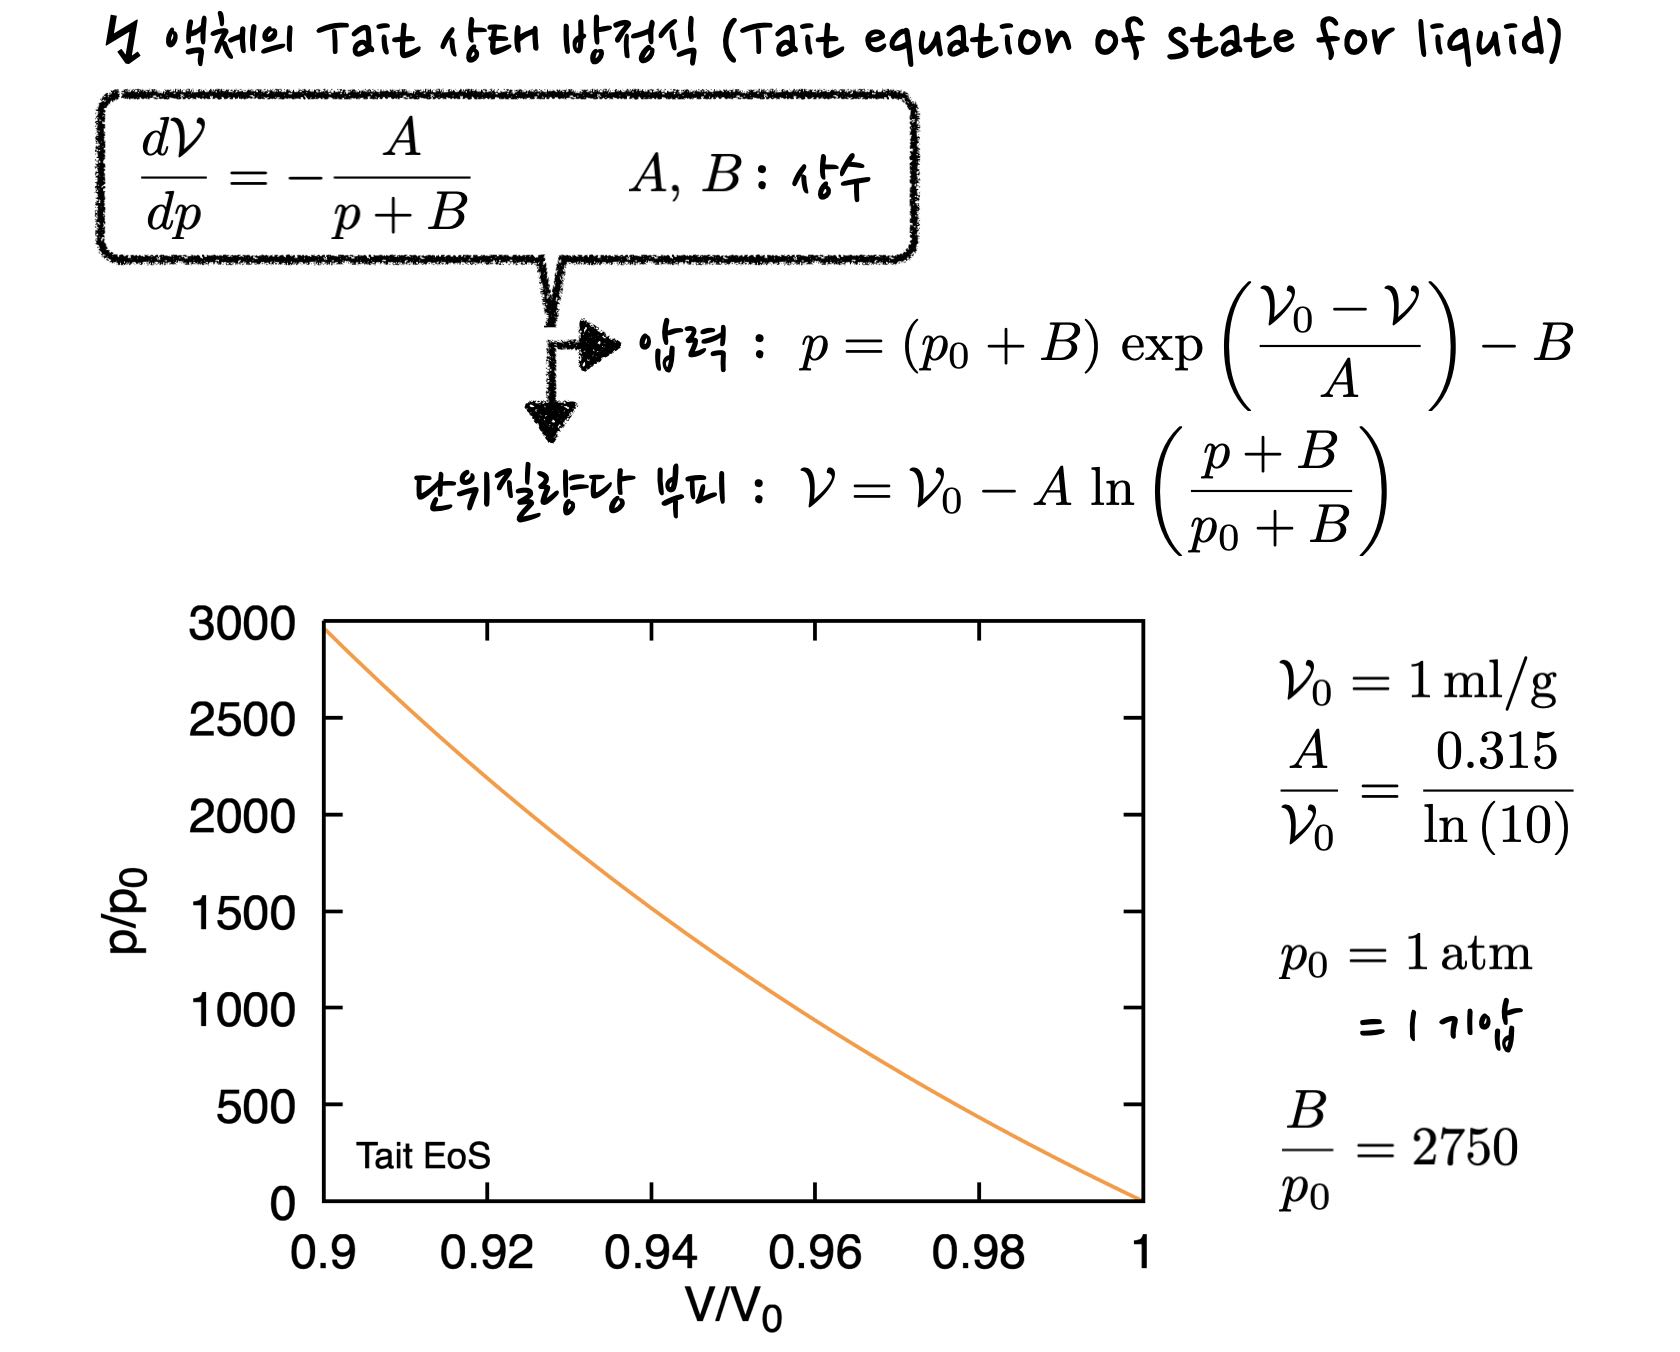 schematics of Tait equation of state&#44; which is used for liquid. There is also a plot for water pressure as a function of specific volume.